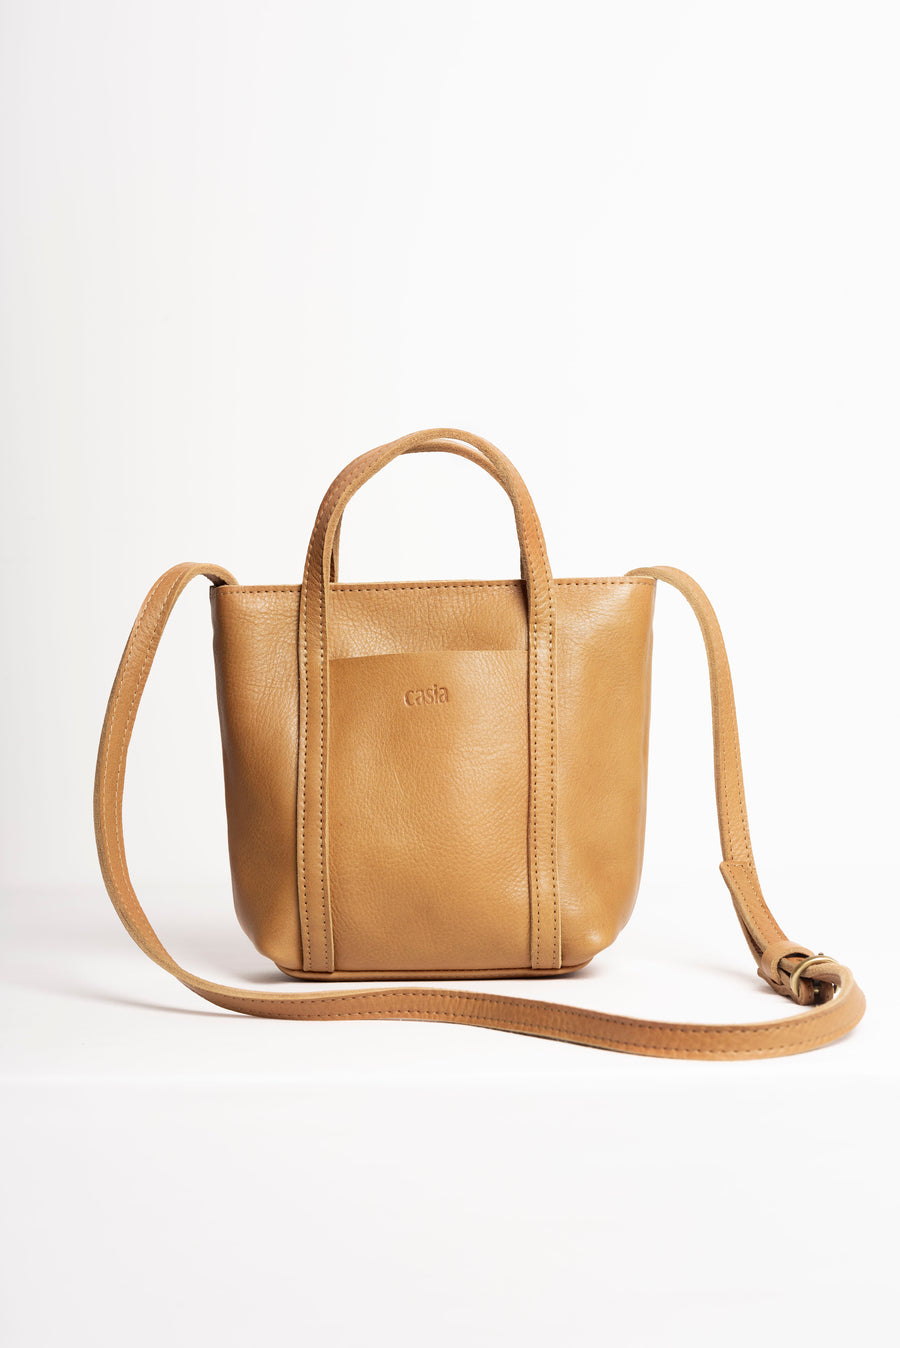 Full grain leather mini tote bag. Vegetable tanned leather shoulder bag. Leather yellow purse.